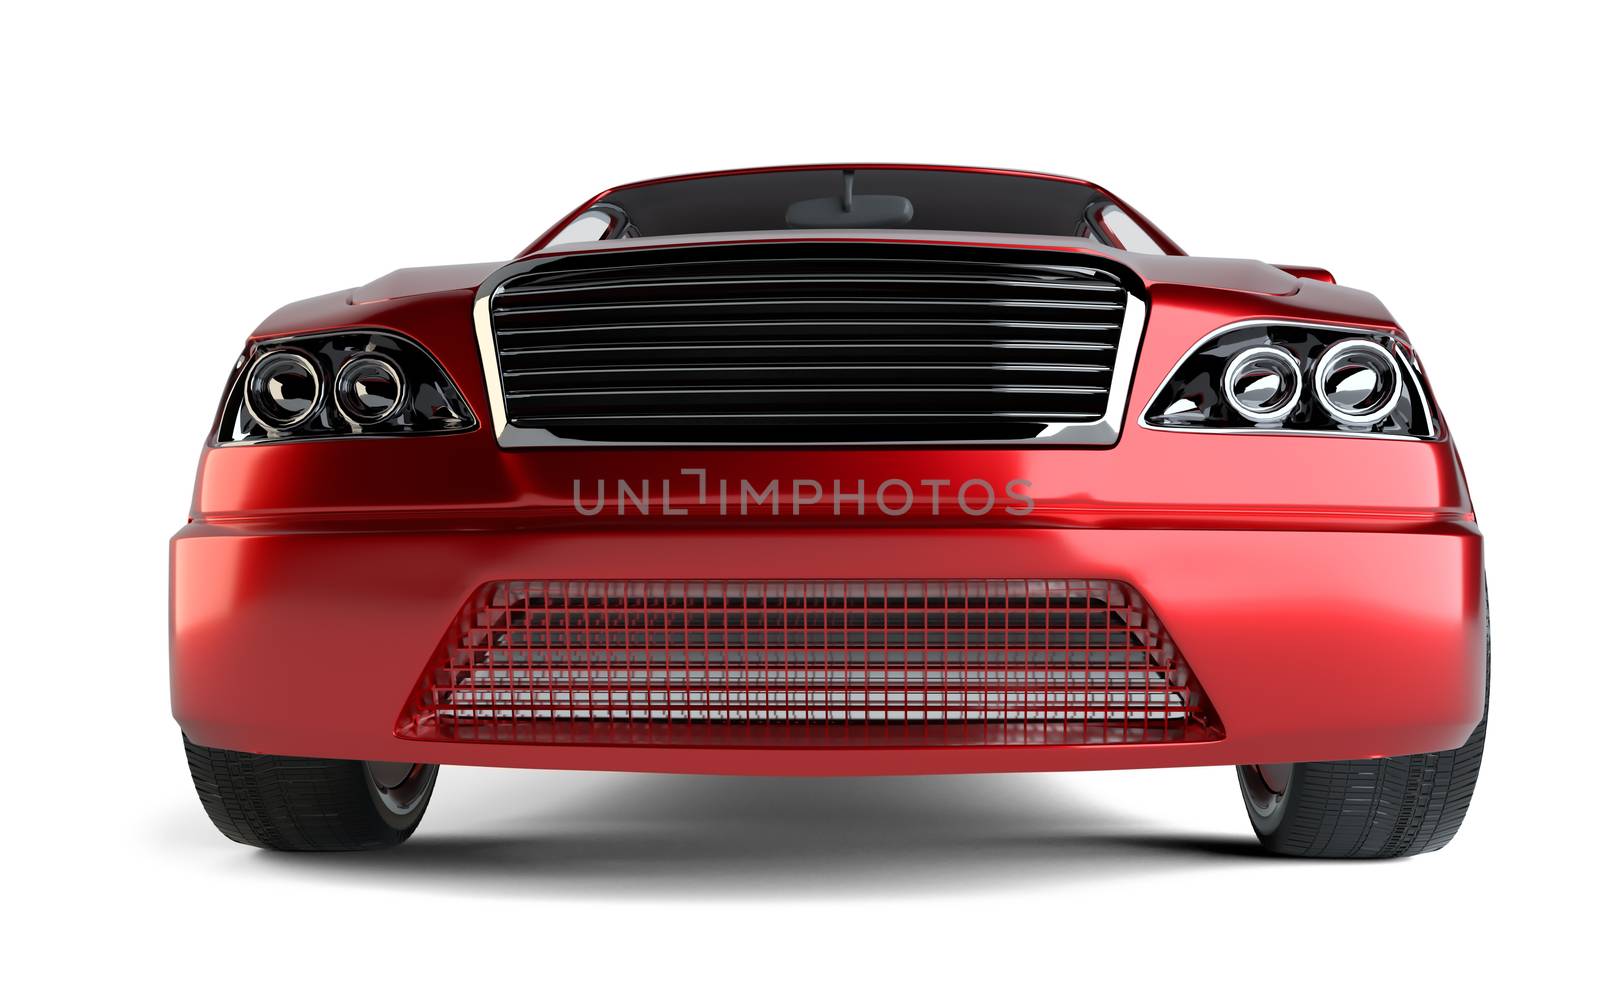 Brandless Generic Red Car. Side View. Isolated On White Background. 3D Illustration